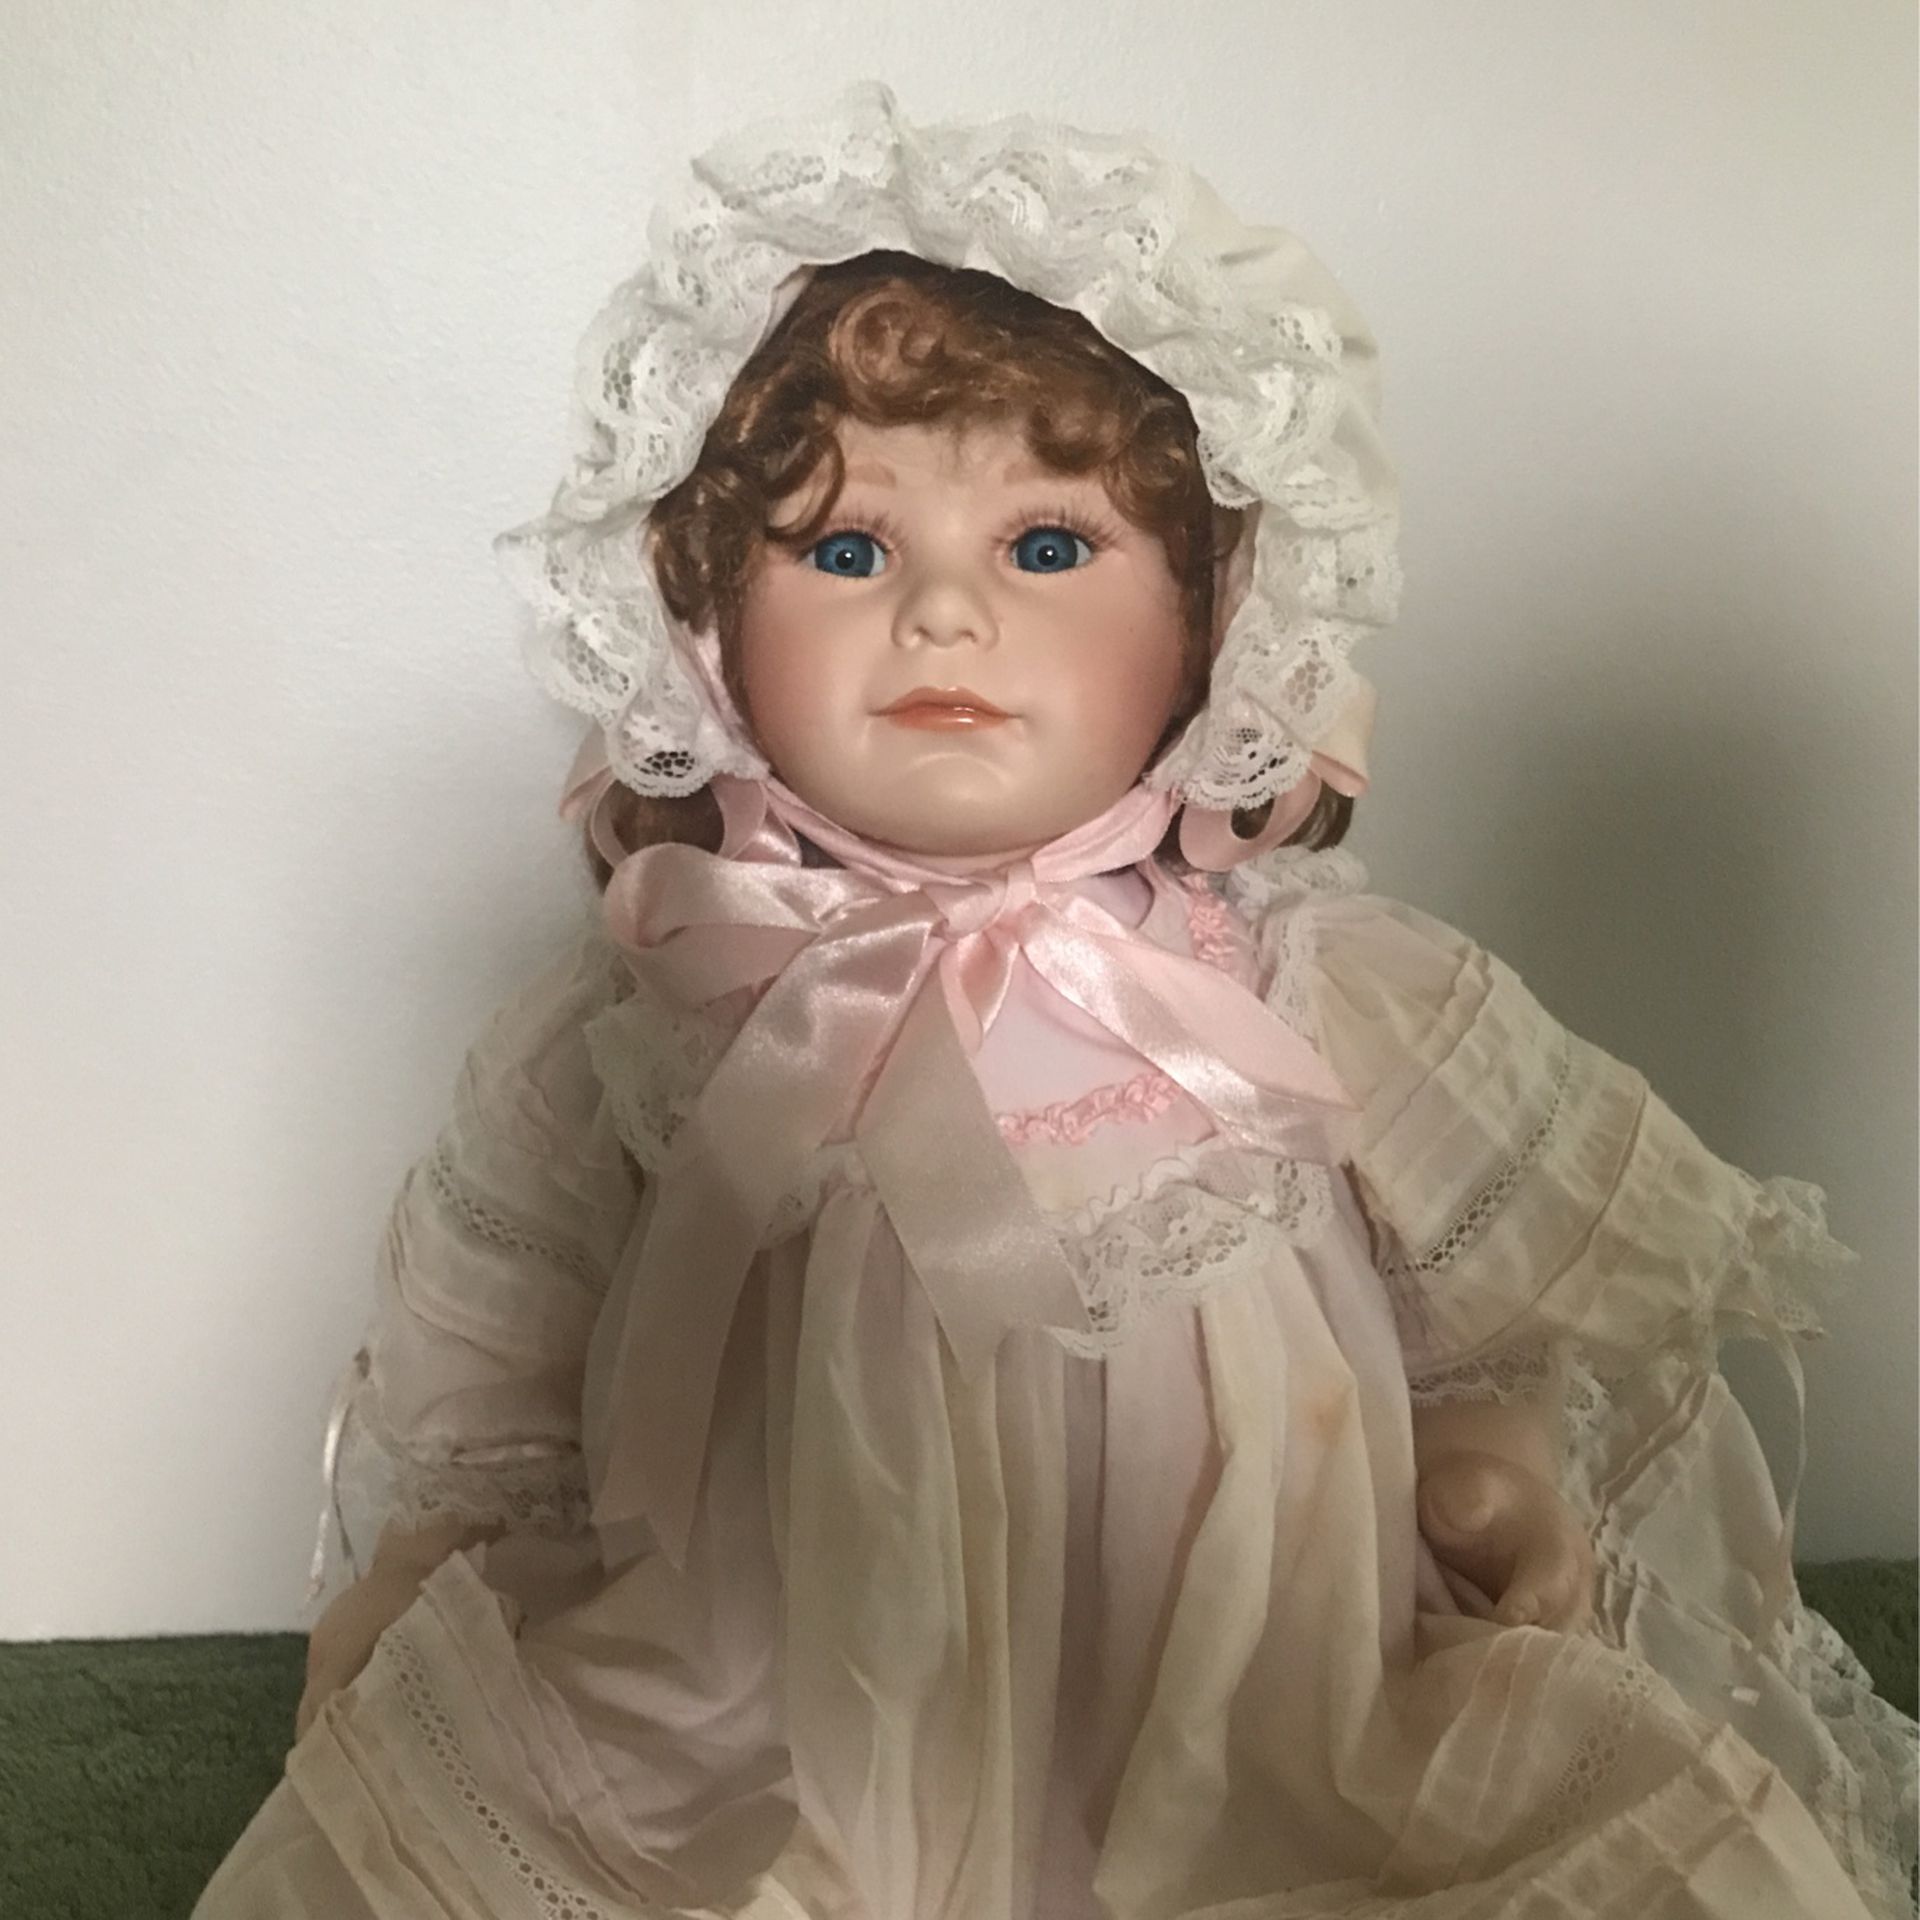 huge porcelain doll with realistic limbs